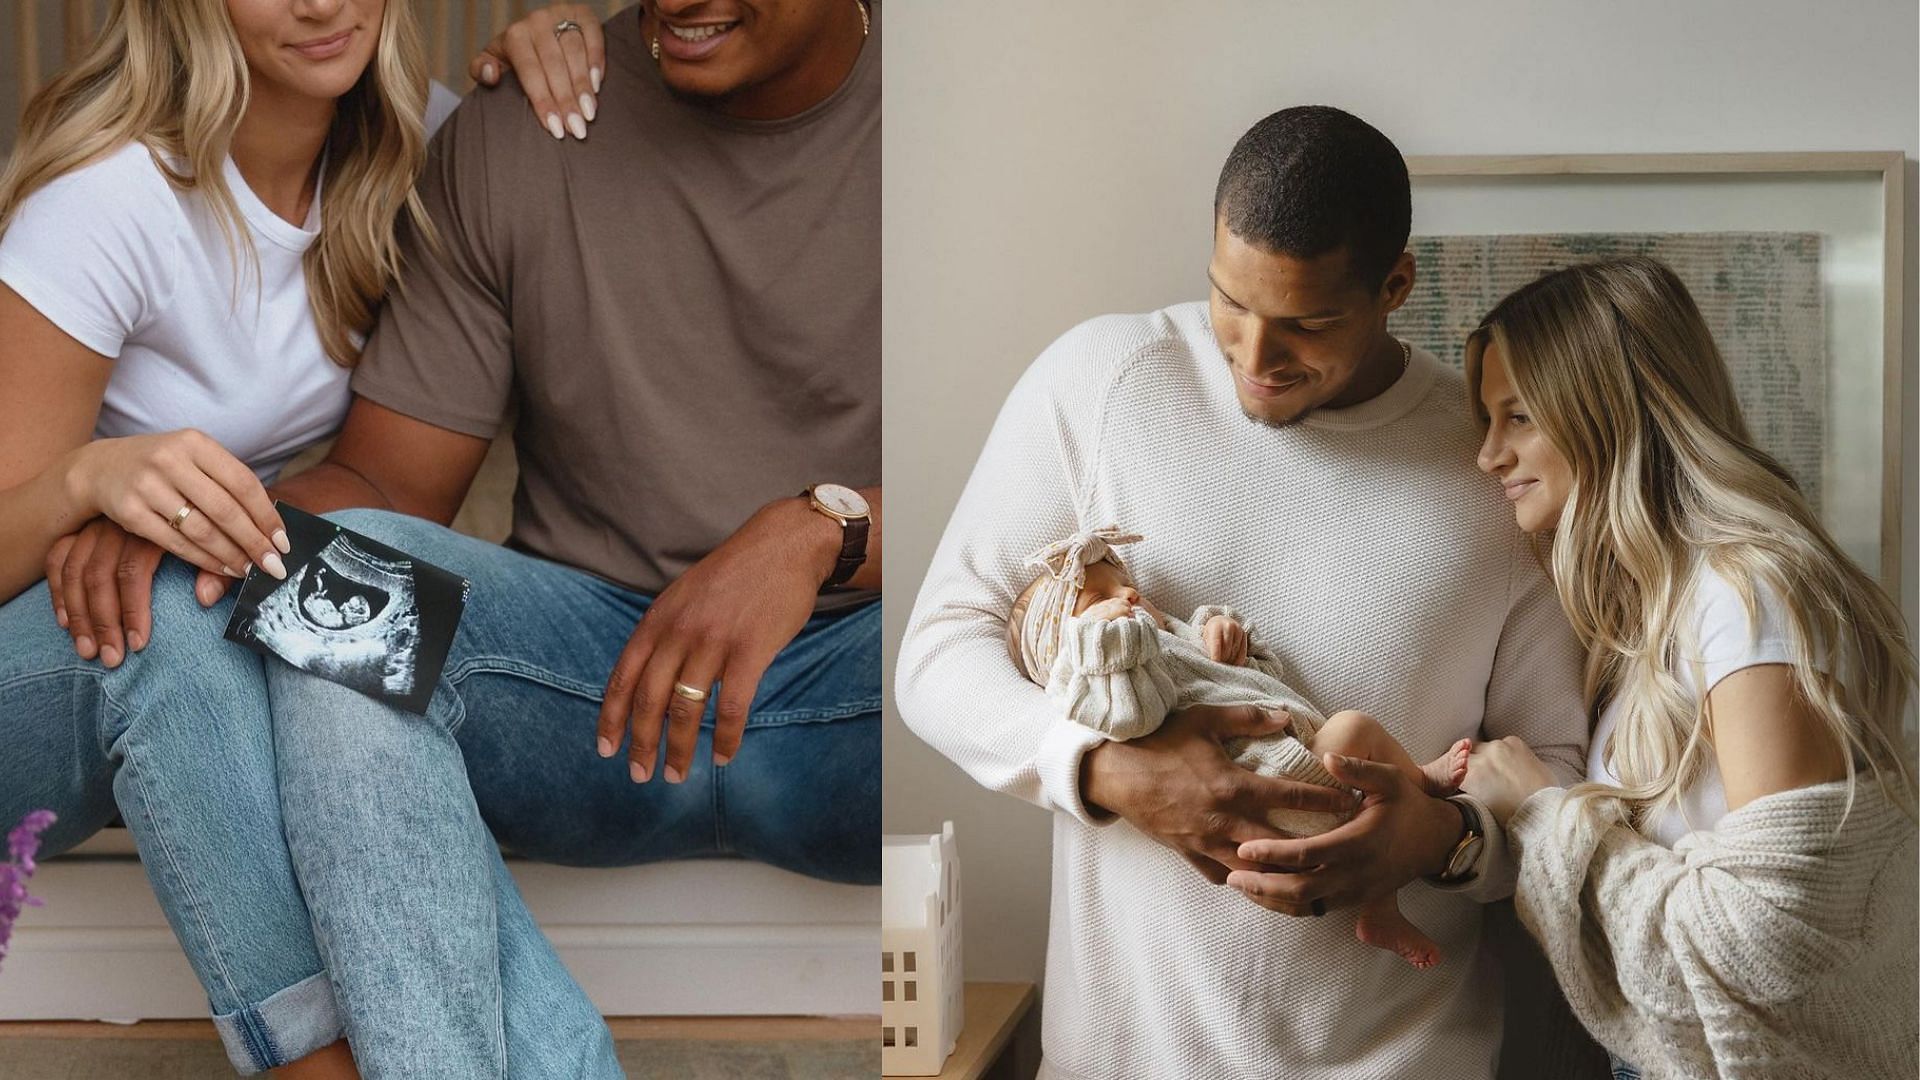 IN PHOTOS: Allison Kuch and Isaac Rochell welcome baby 